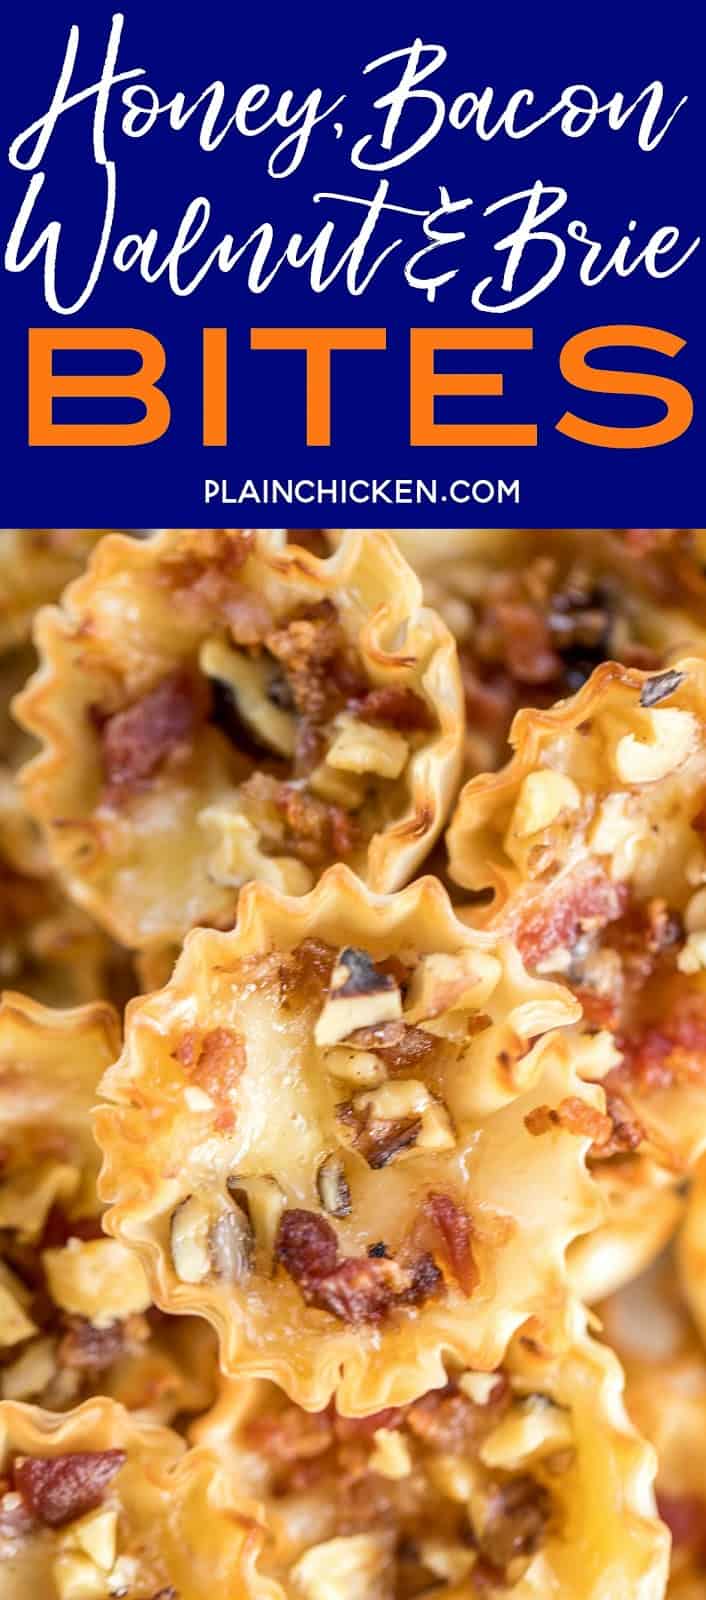 Honey Bacon Walnut and Brie Bites recipe - sweet and salty goodness!!! The flavor combination is totally addicting. Can make the bites ahead of time and refrigerate until ready to bake. Great for all your holiday parties and tailgating!! You might want to double the recipe - these cheese bites don't last long!! #appetizer #holidayappetizer #brie #cheese